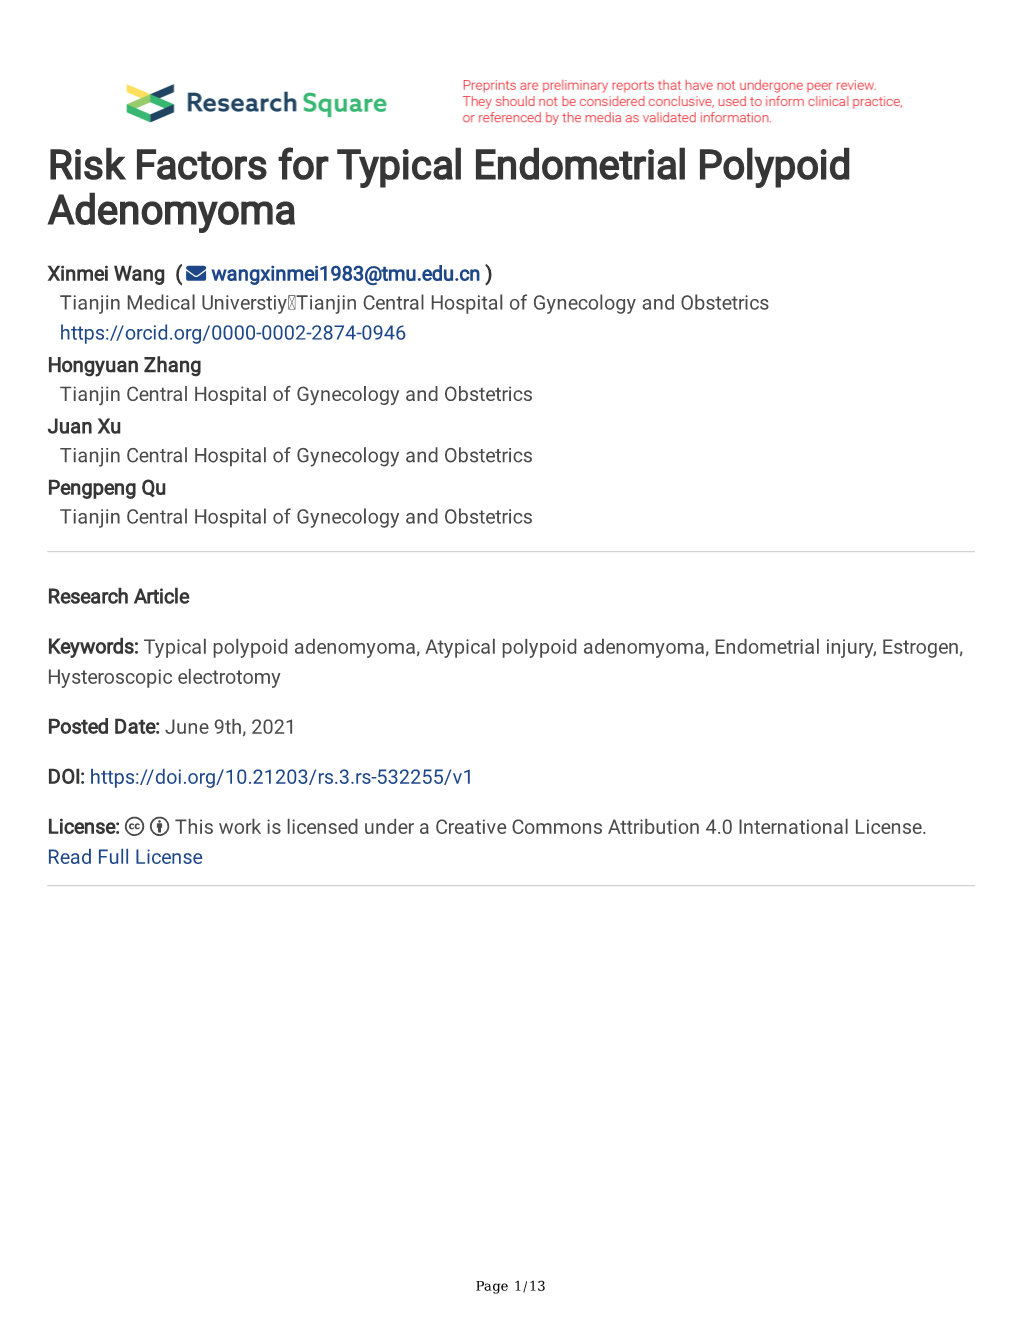 Risk Factors for Typical Endometrial Polypoid Adenomyoma